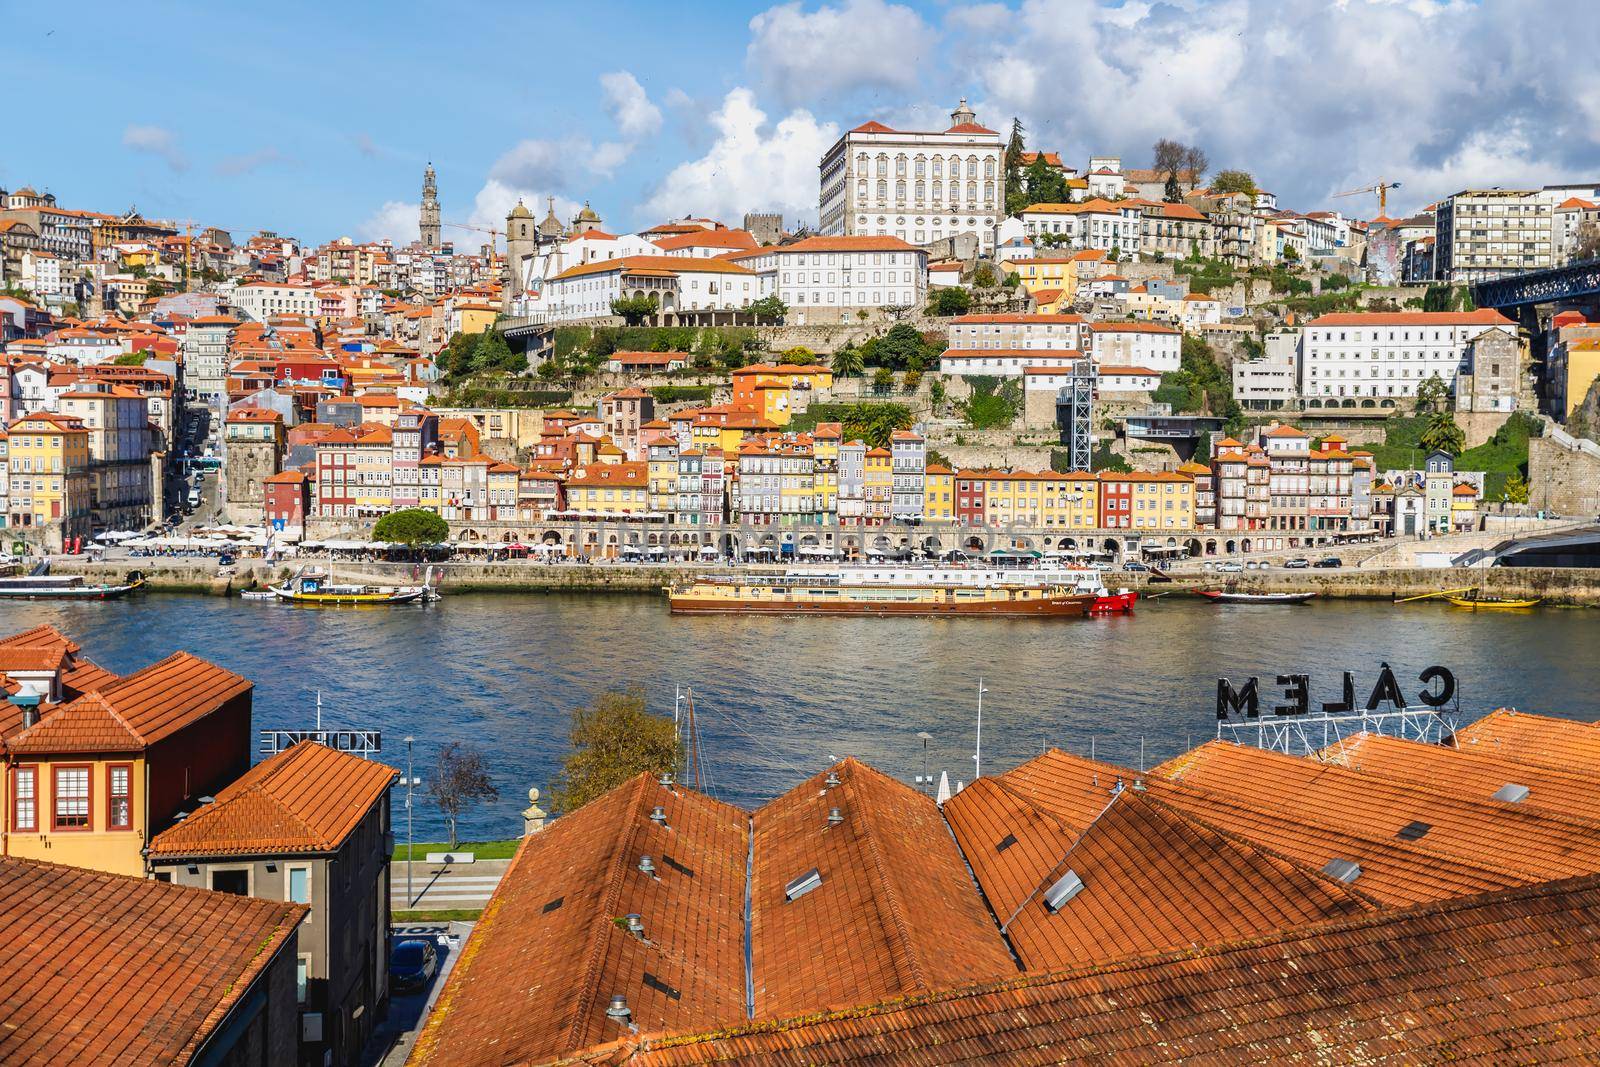 Porto, Portugal - October 23, 2020: View of the buildings with typical architecture and boats of tourist areas on the banks of the Douro river on an autumn day